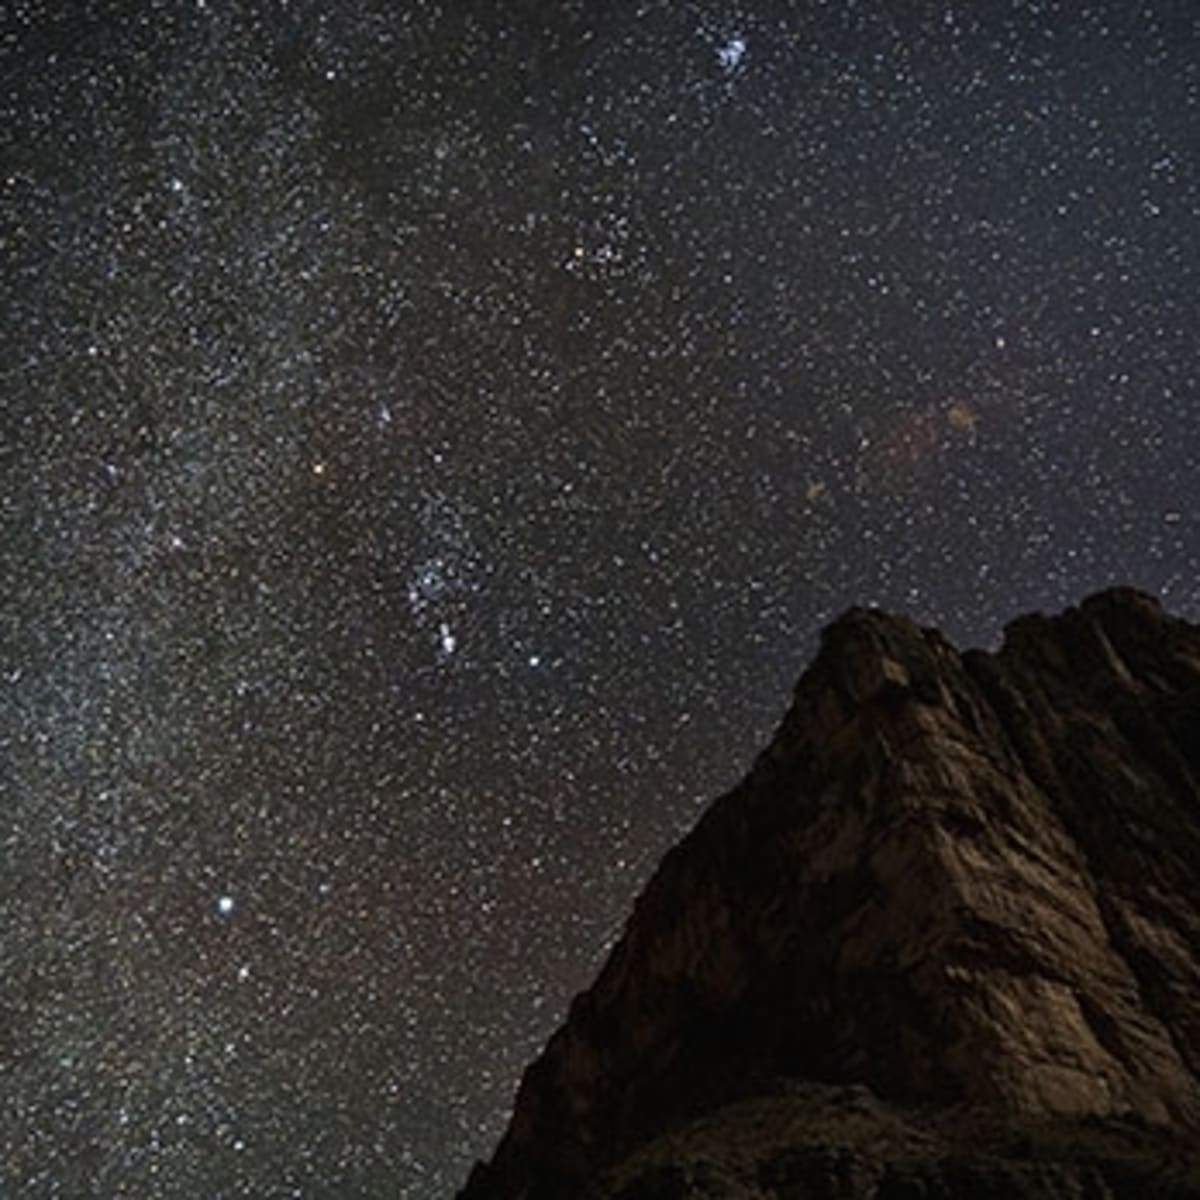 Where Did All the Stars Go? - How Light Pollution Clouds the Night